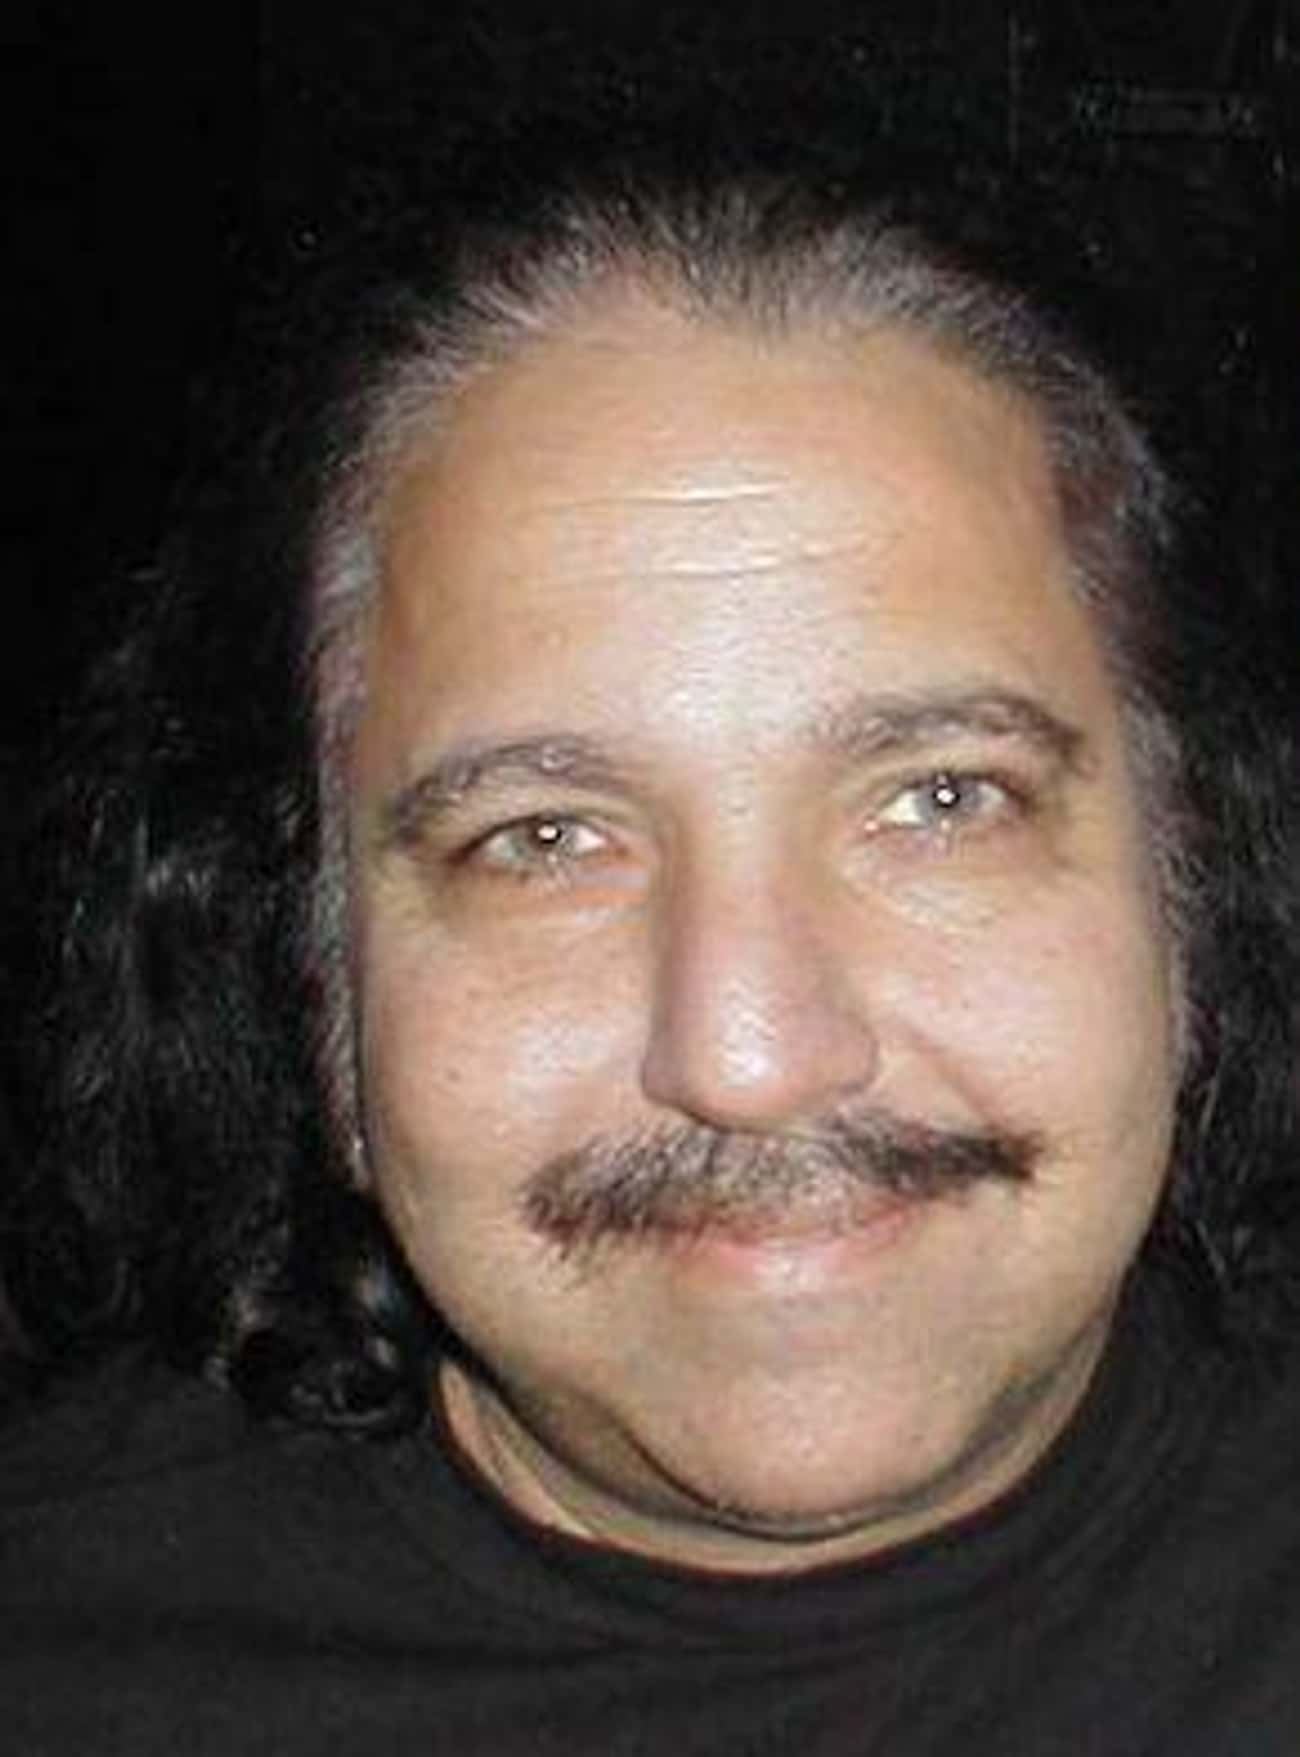 No One In The Adult Industry Wanted To Touch The Tape - Not Even Ron Jeremy